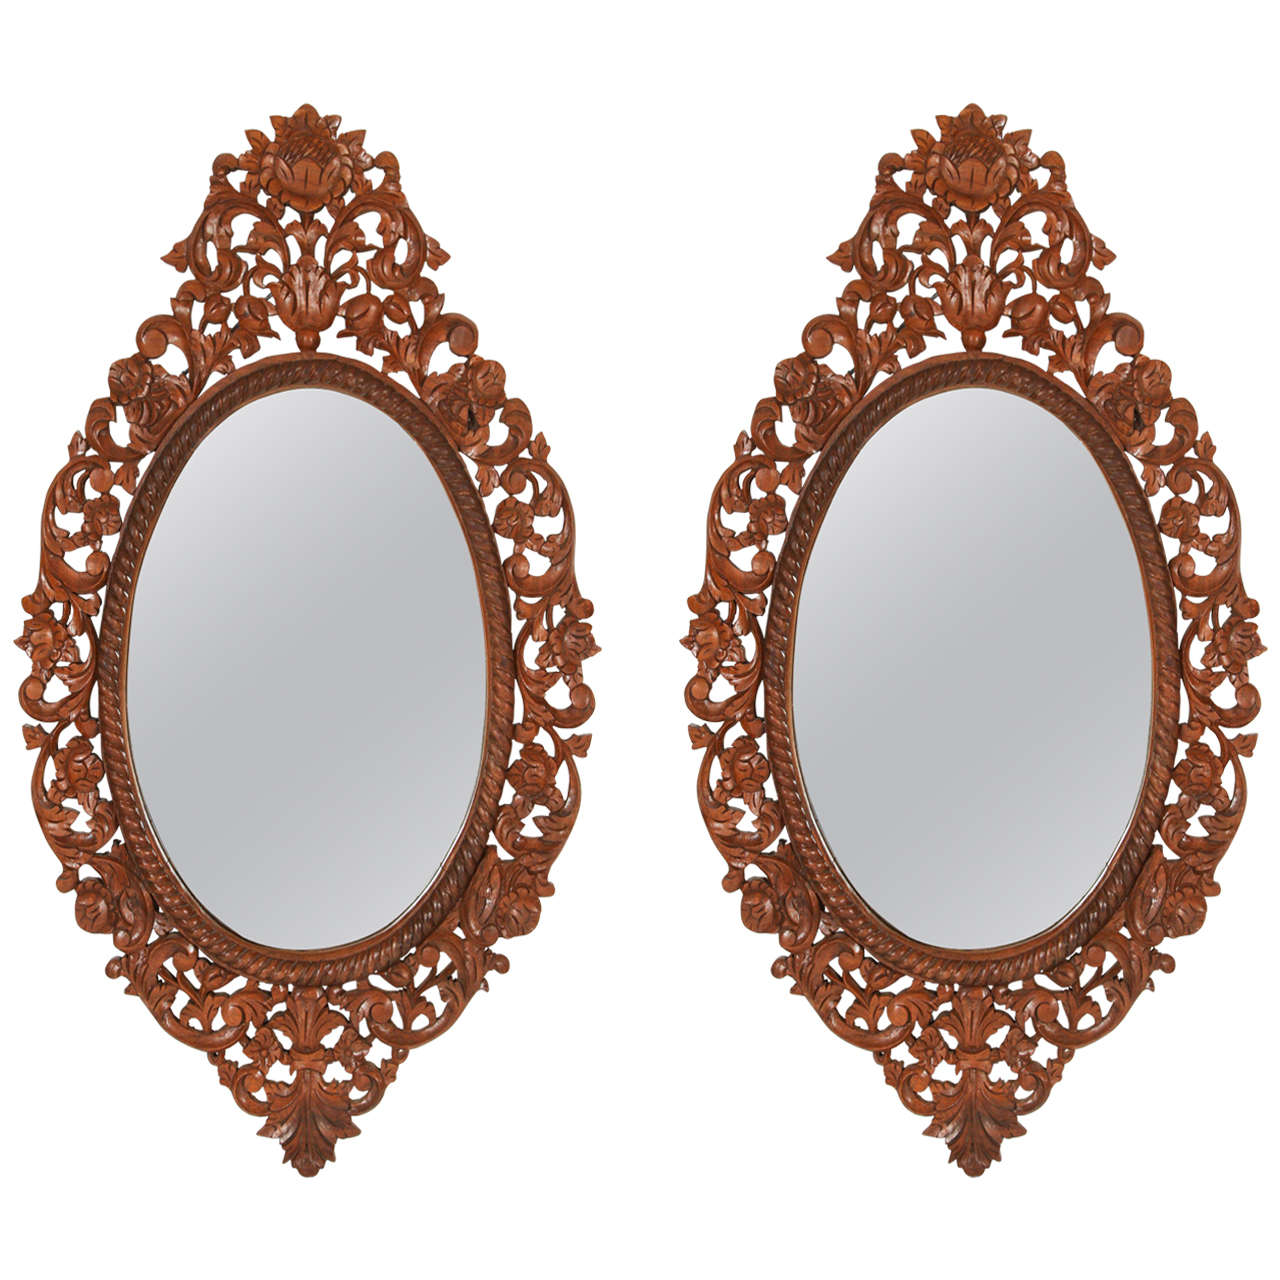 Carved Wood Oval Mirror at 1stdibs